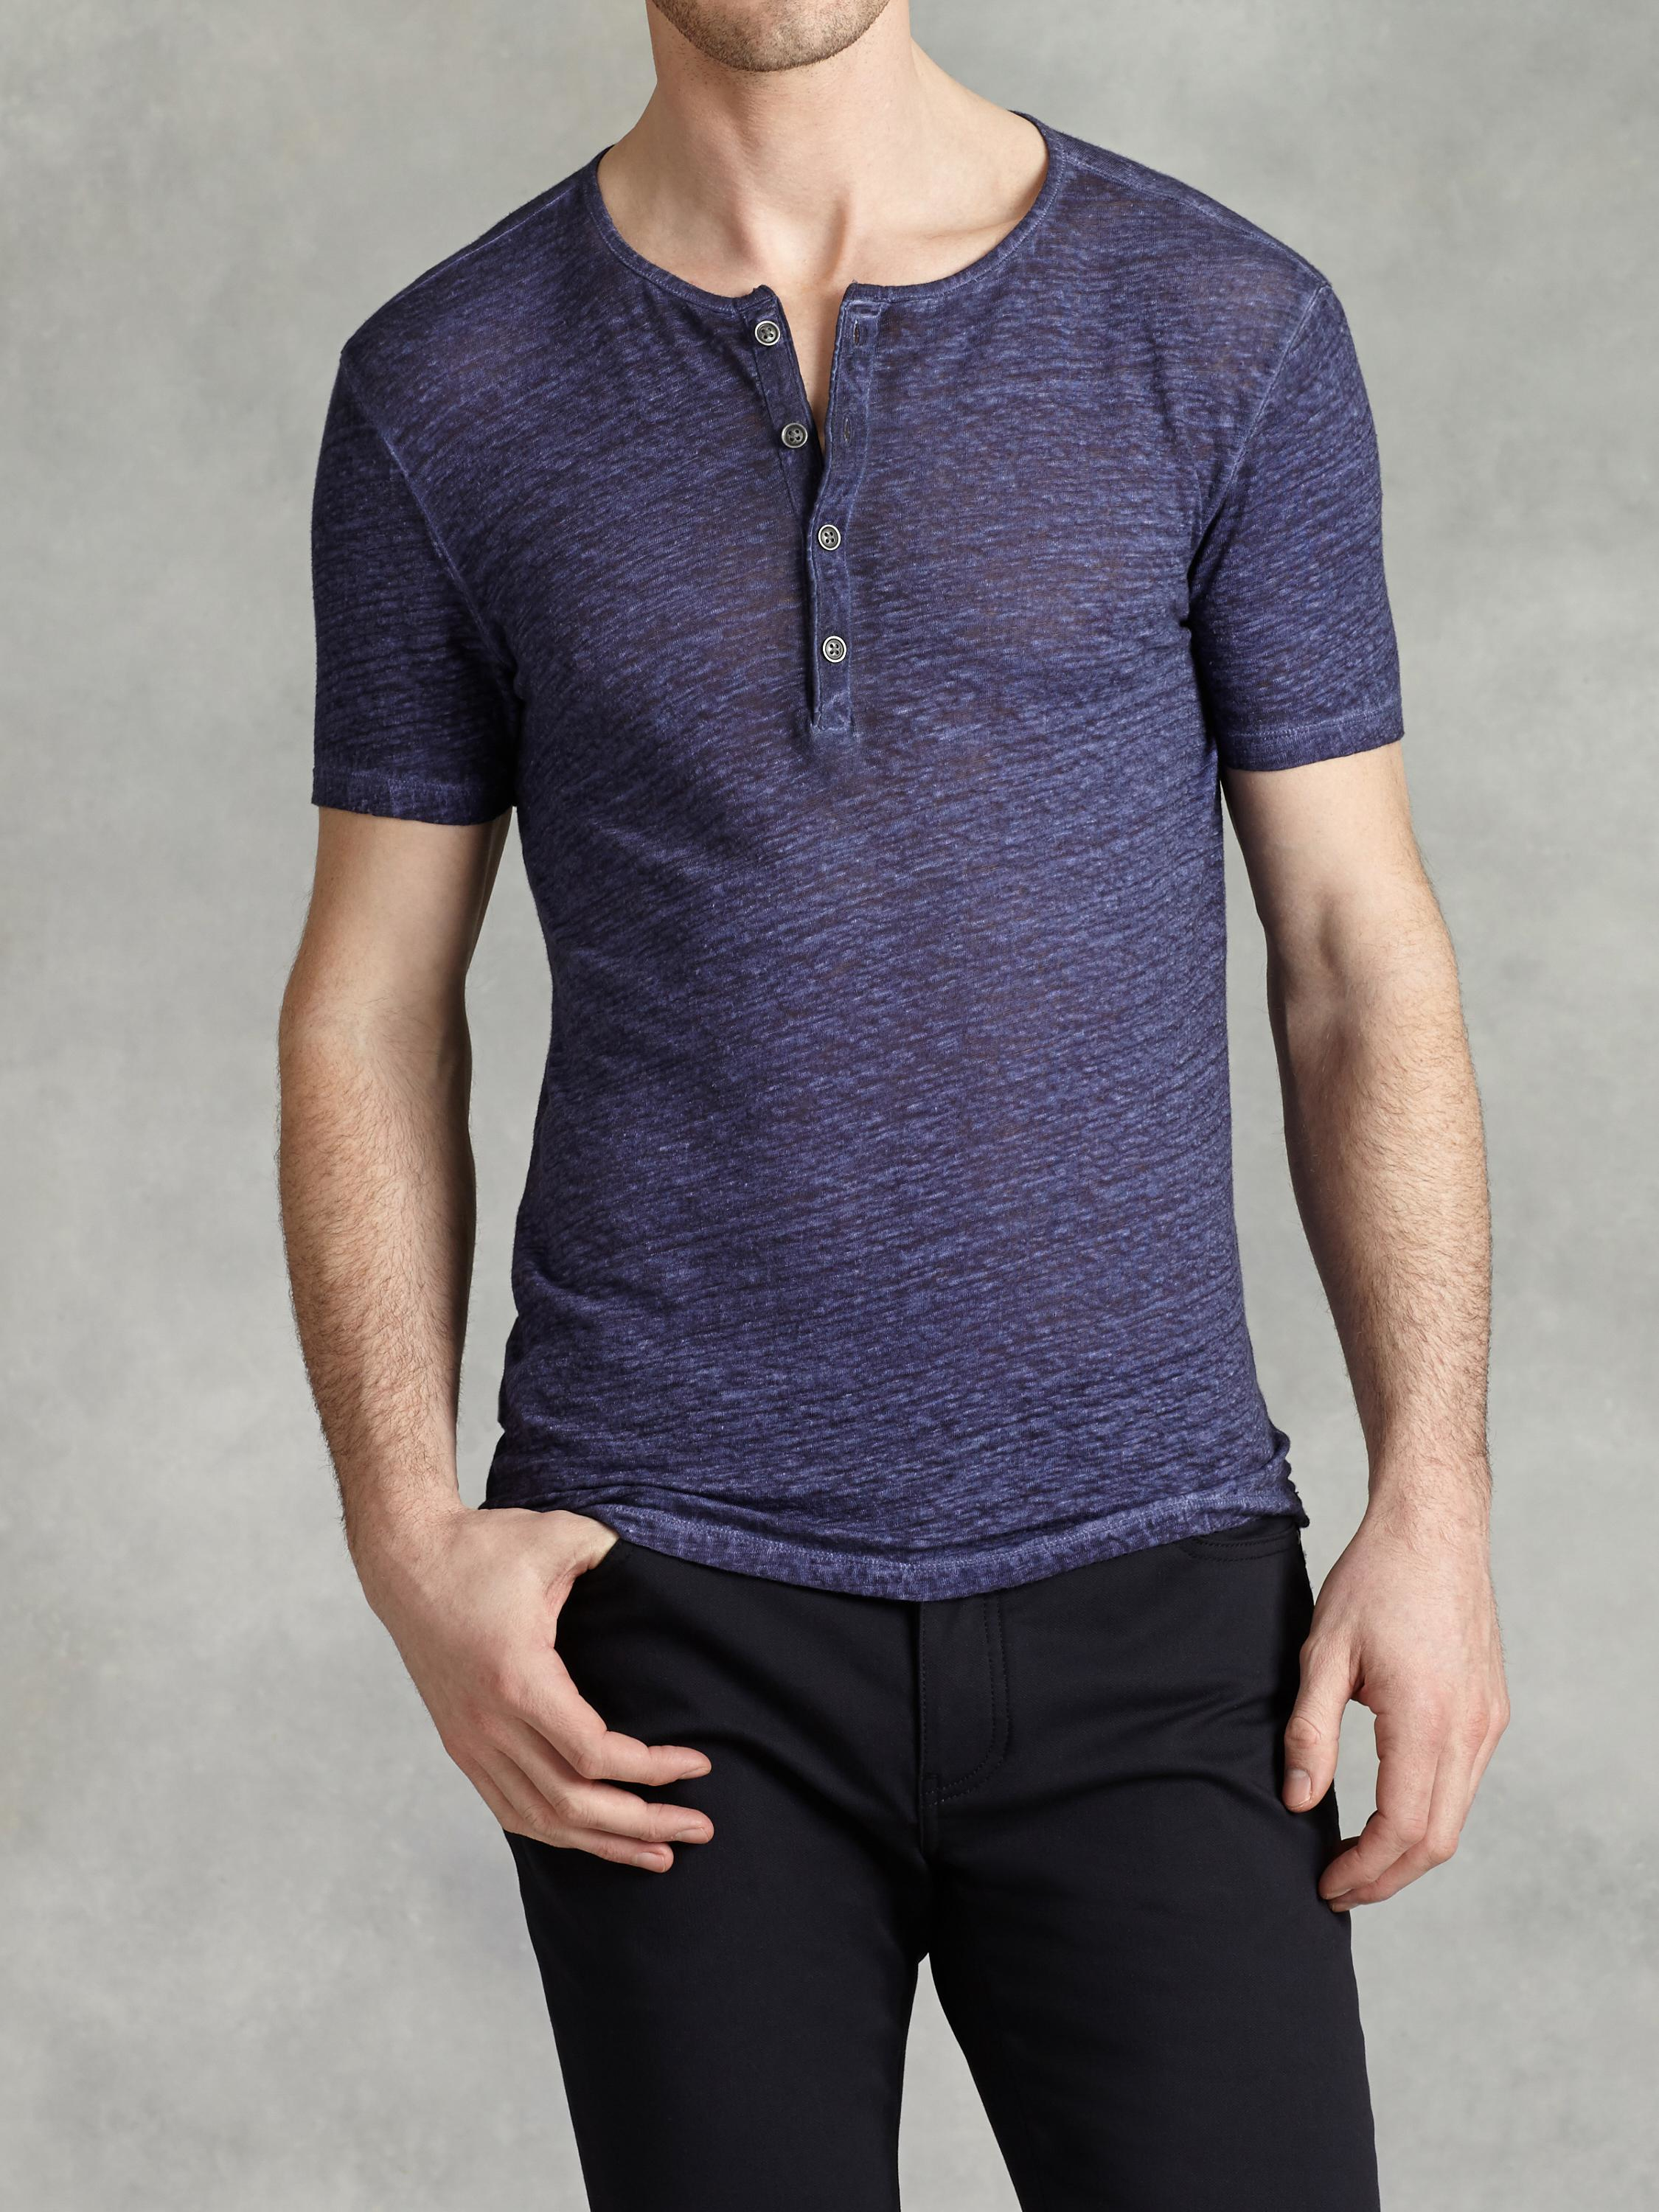 John Varvatos Linen Henley With Cold Water Dye in Purple for Men - Lyst